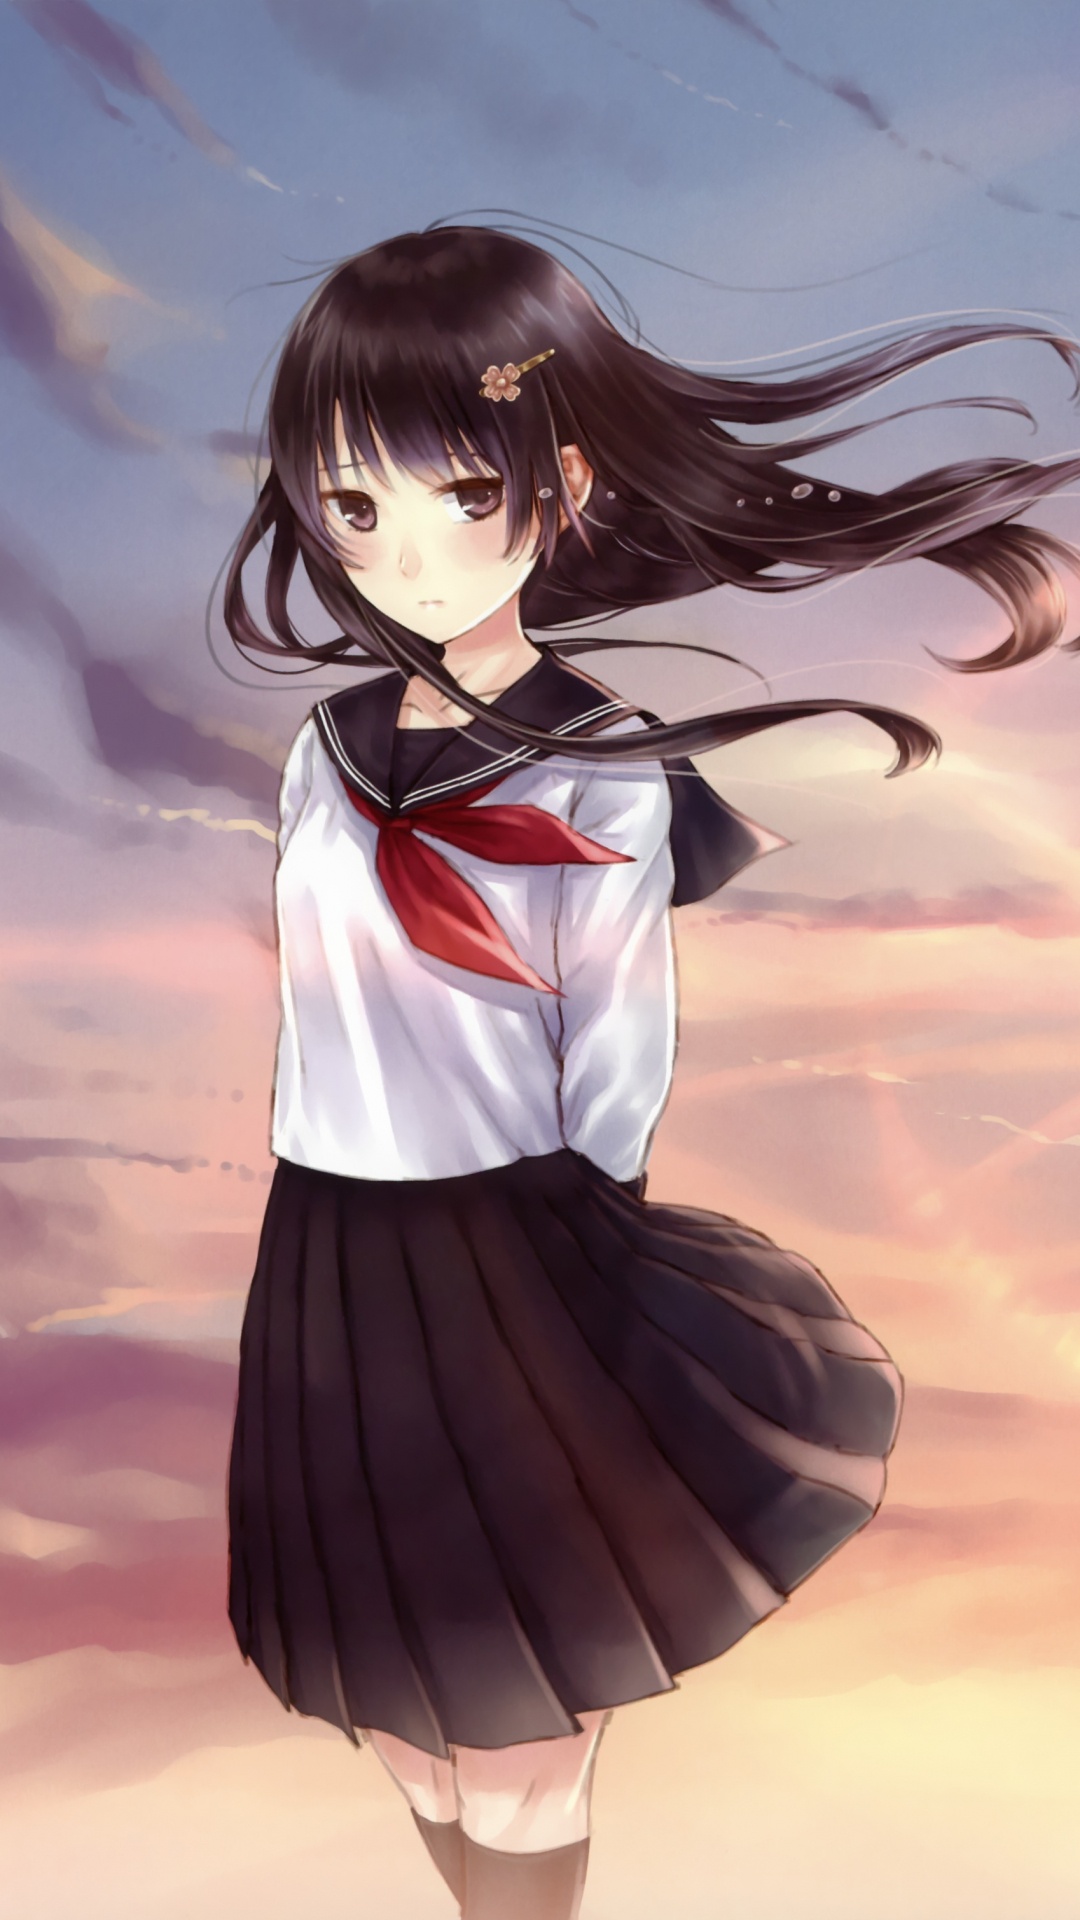 Black Haired Female Anime Character. Wallpaper in 1080x1920 Resolution